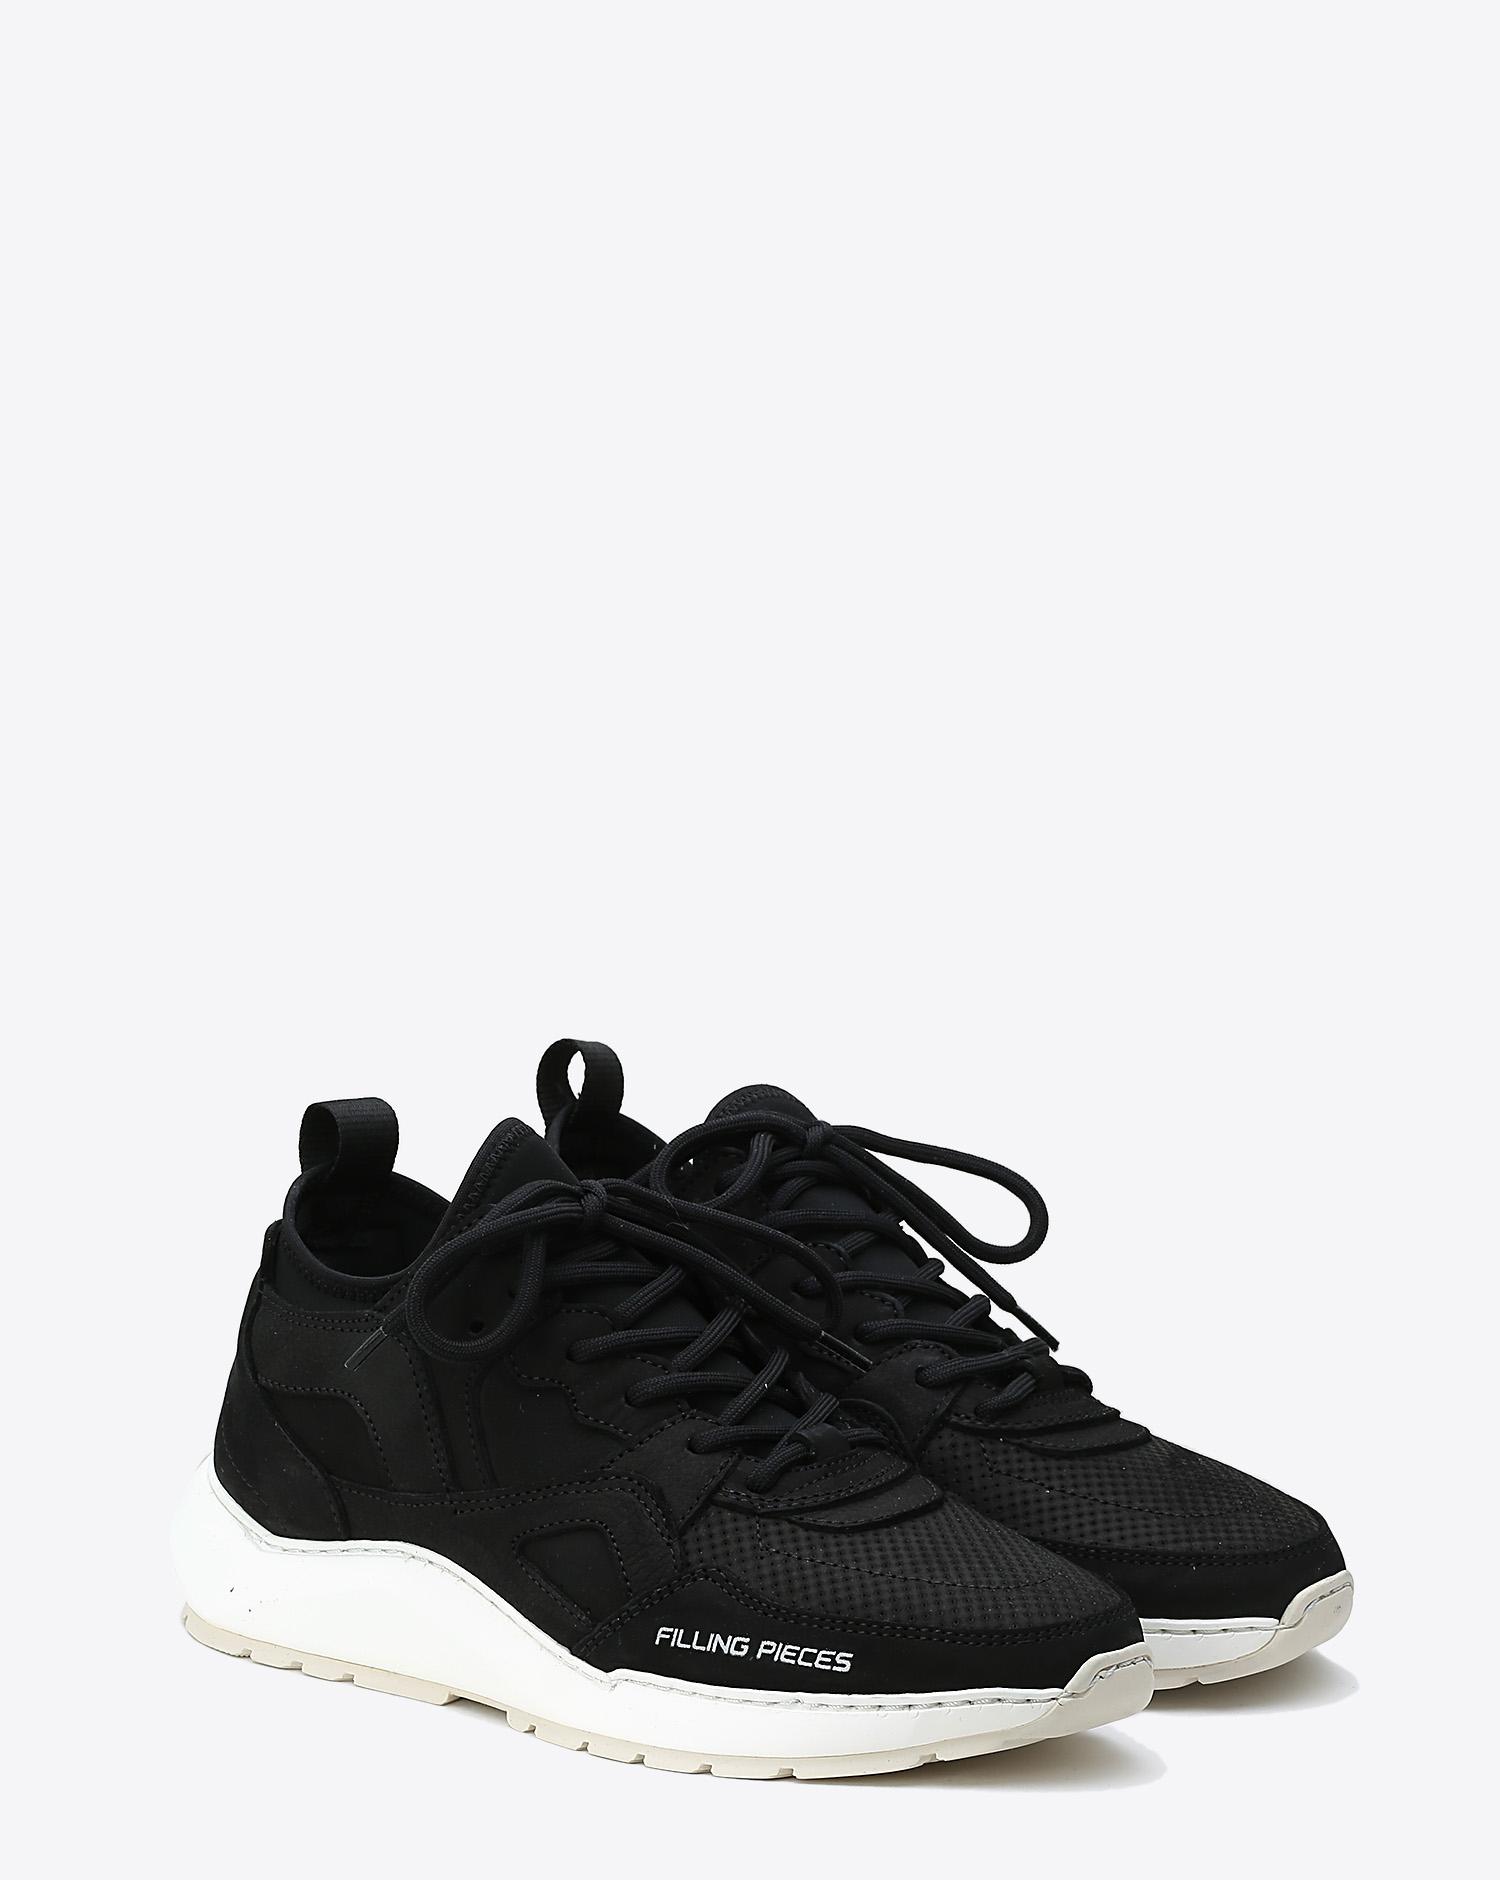 Filling Pieces Sneakers Fence Origin Low Arch Runner Fence All Black Black